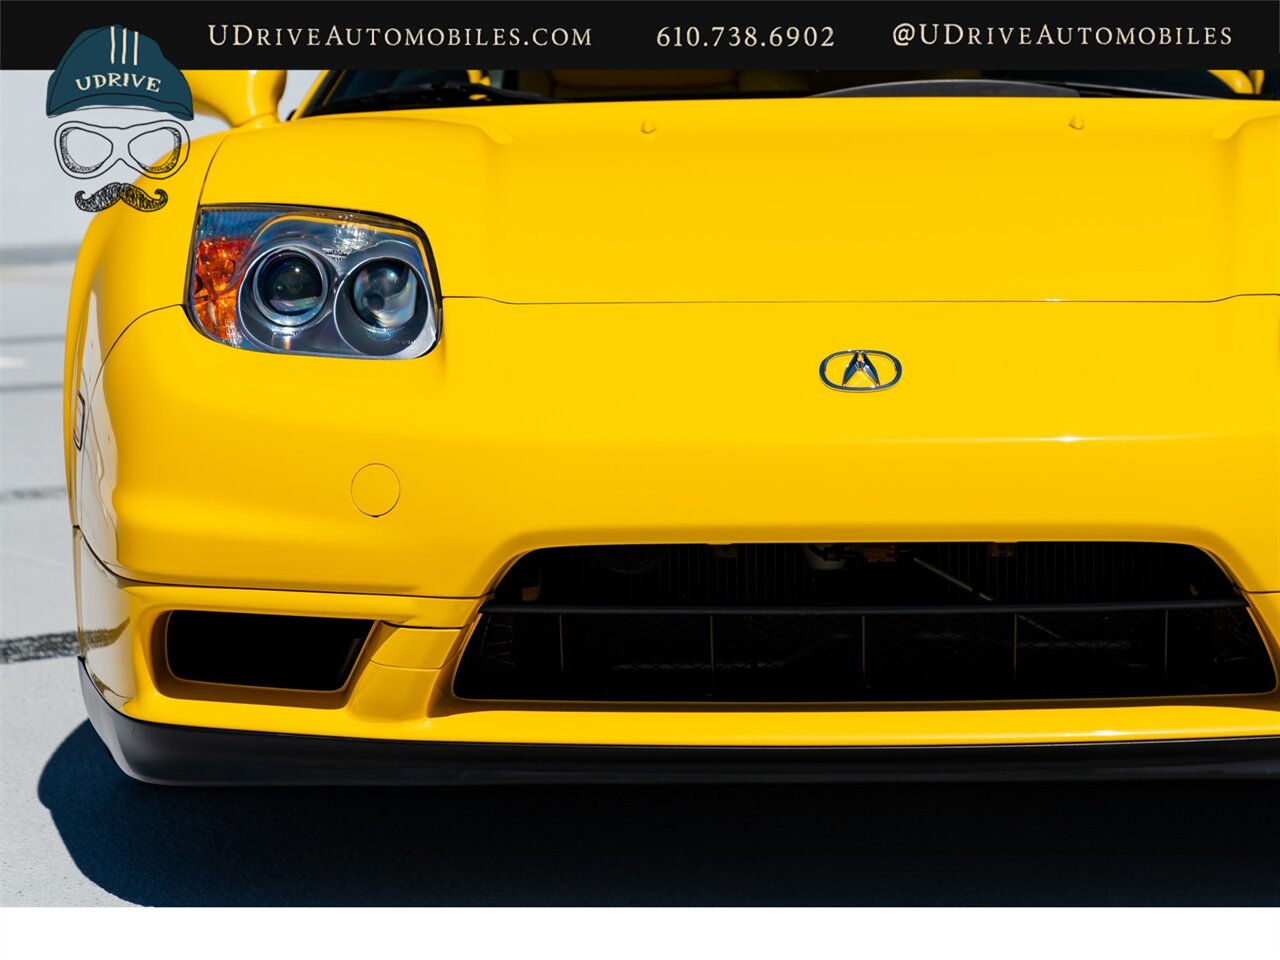 2003 Acura NSX NSX-T  Spa Yellow over Yellow Lthr 1 of 13 Produced - Photo 14 - West Chester, PA 19382